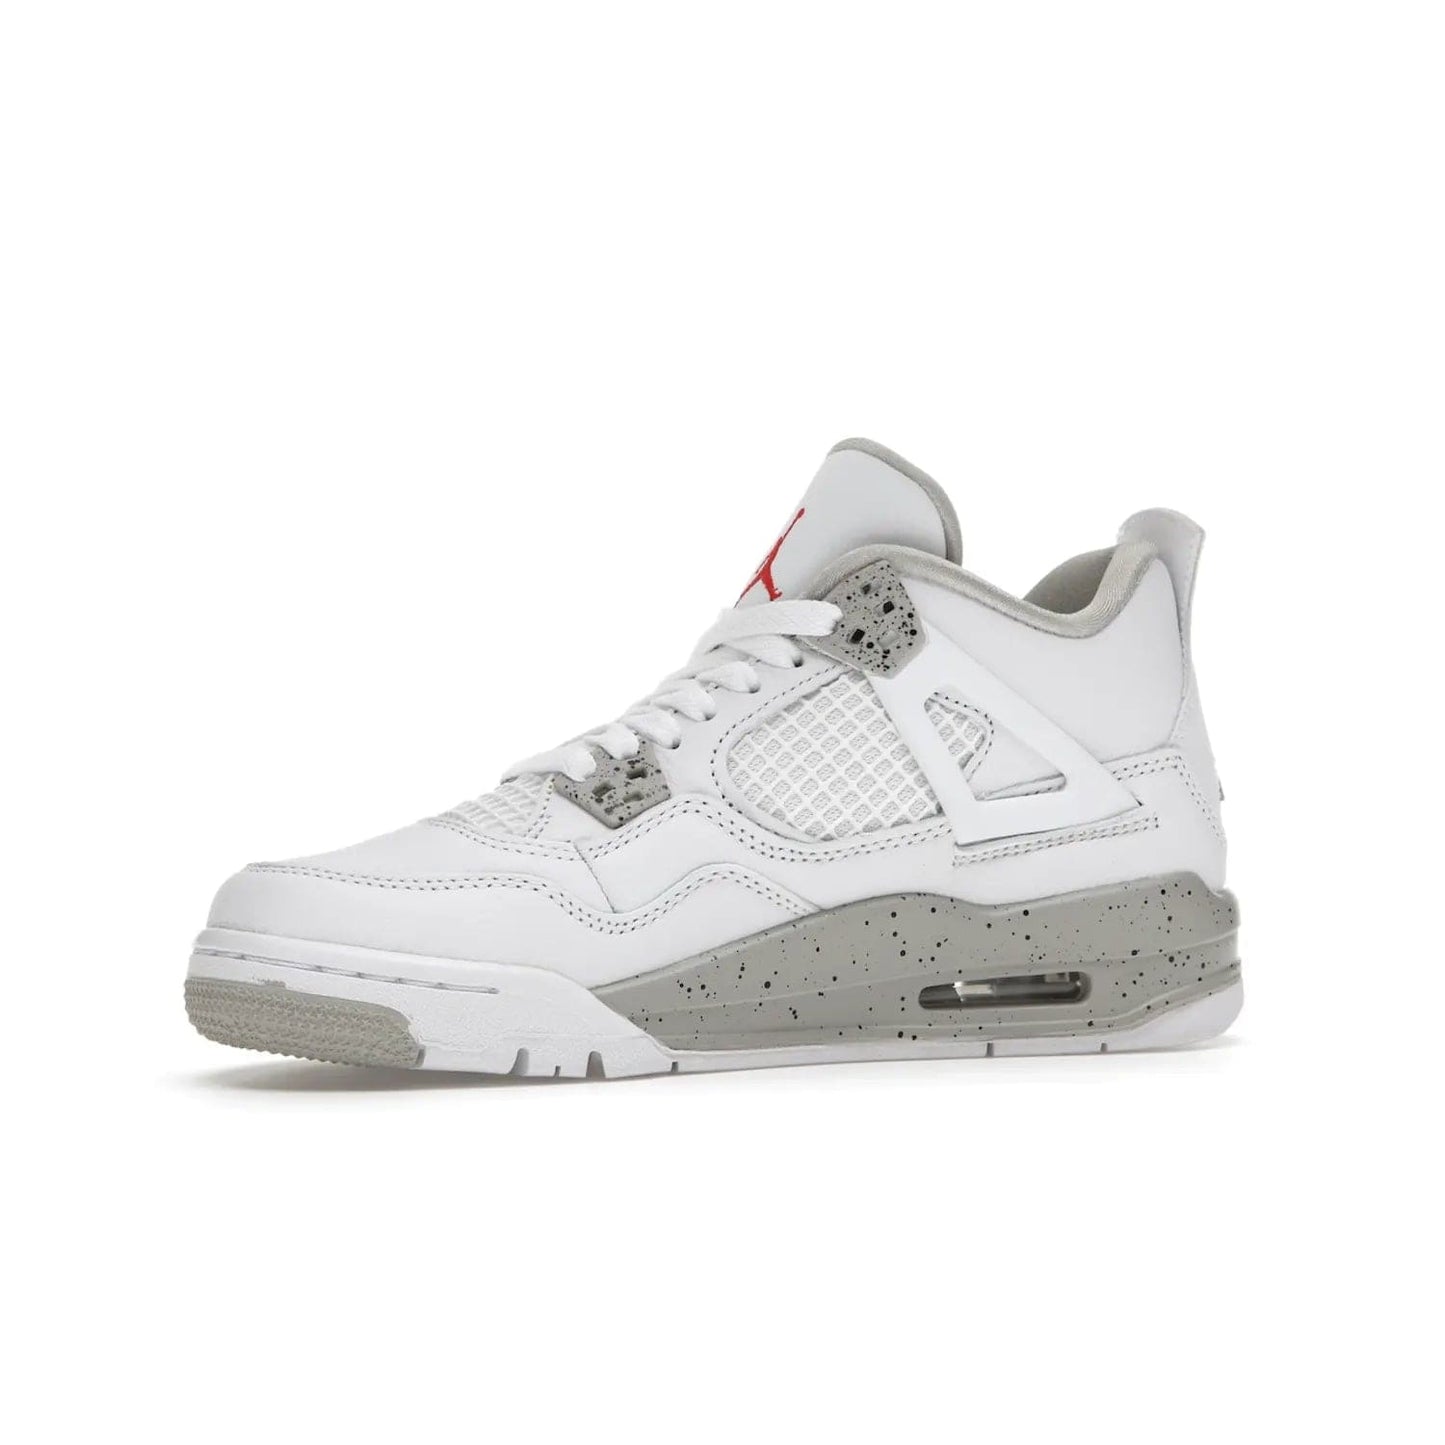 Jordan 4 Retro White Oreo (2021) (GS) - Image 17 - Only at www.BallersClubKickz.com - White Oreo Air Jordan 4 Retro 2021 GS - Iconic sneaker silhouette with white canvas upper, Tech Grey detailing, and Fire Red accents. Available July 2021.